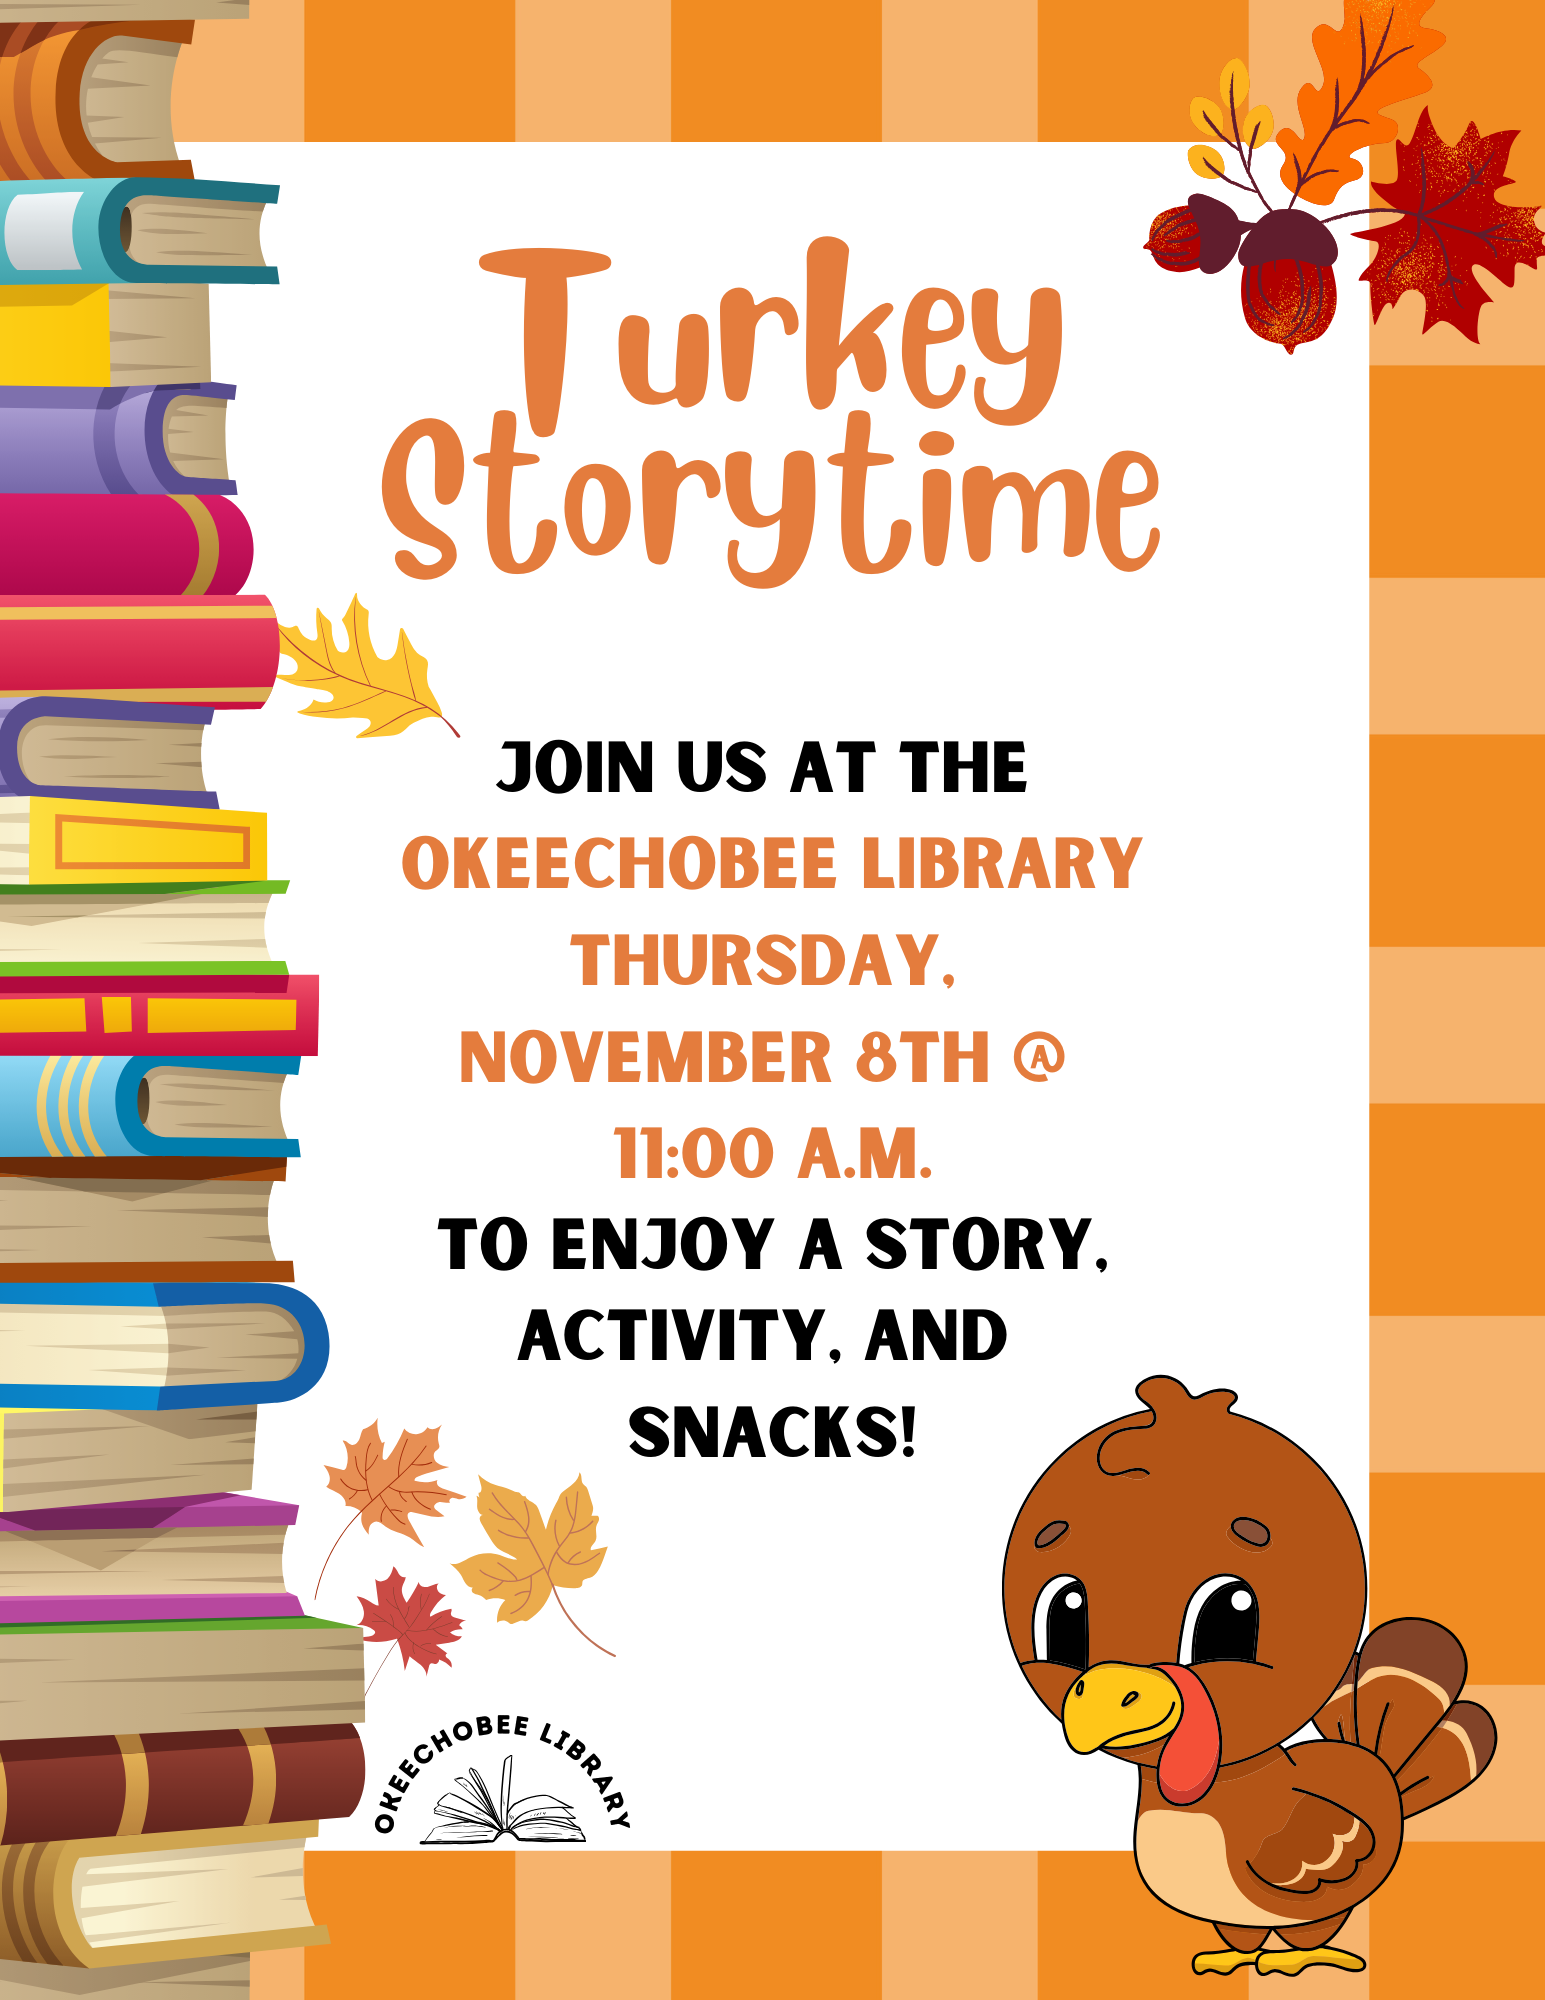 Join us at the Okeechobee Library on November 8th at 11 A.M. for our Turkey Storytime! Come enjoy a story, a simple activity, and fun snacks!